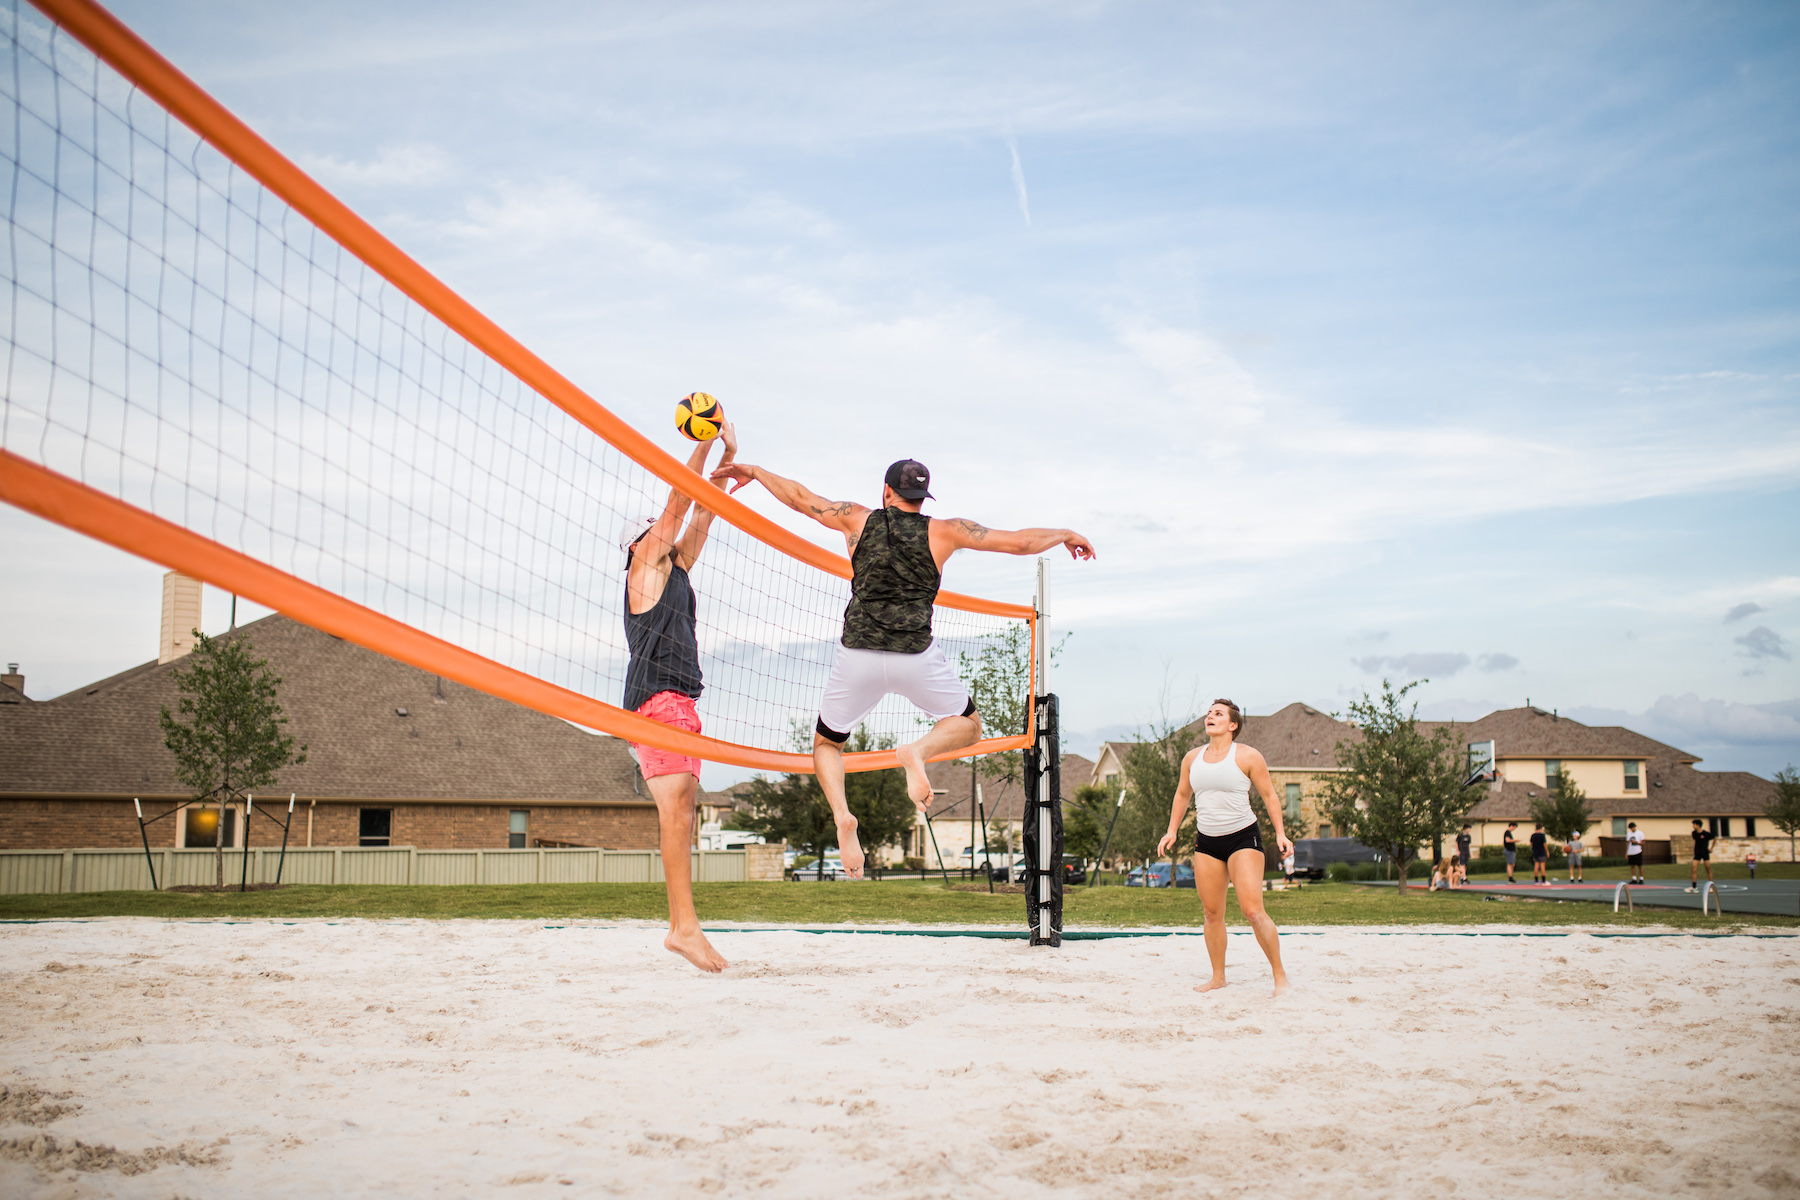 hiking trails & parks - Sand Volleyball